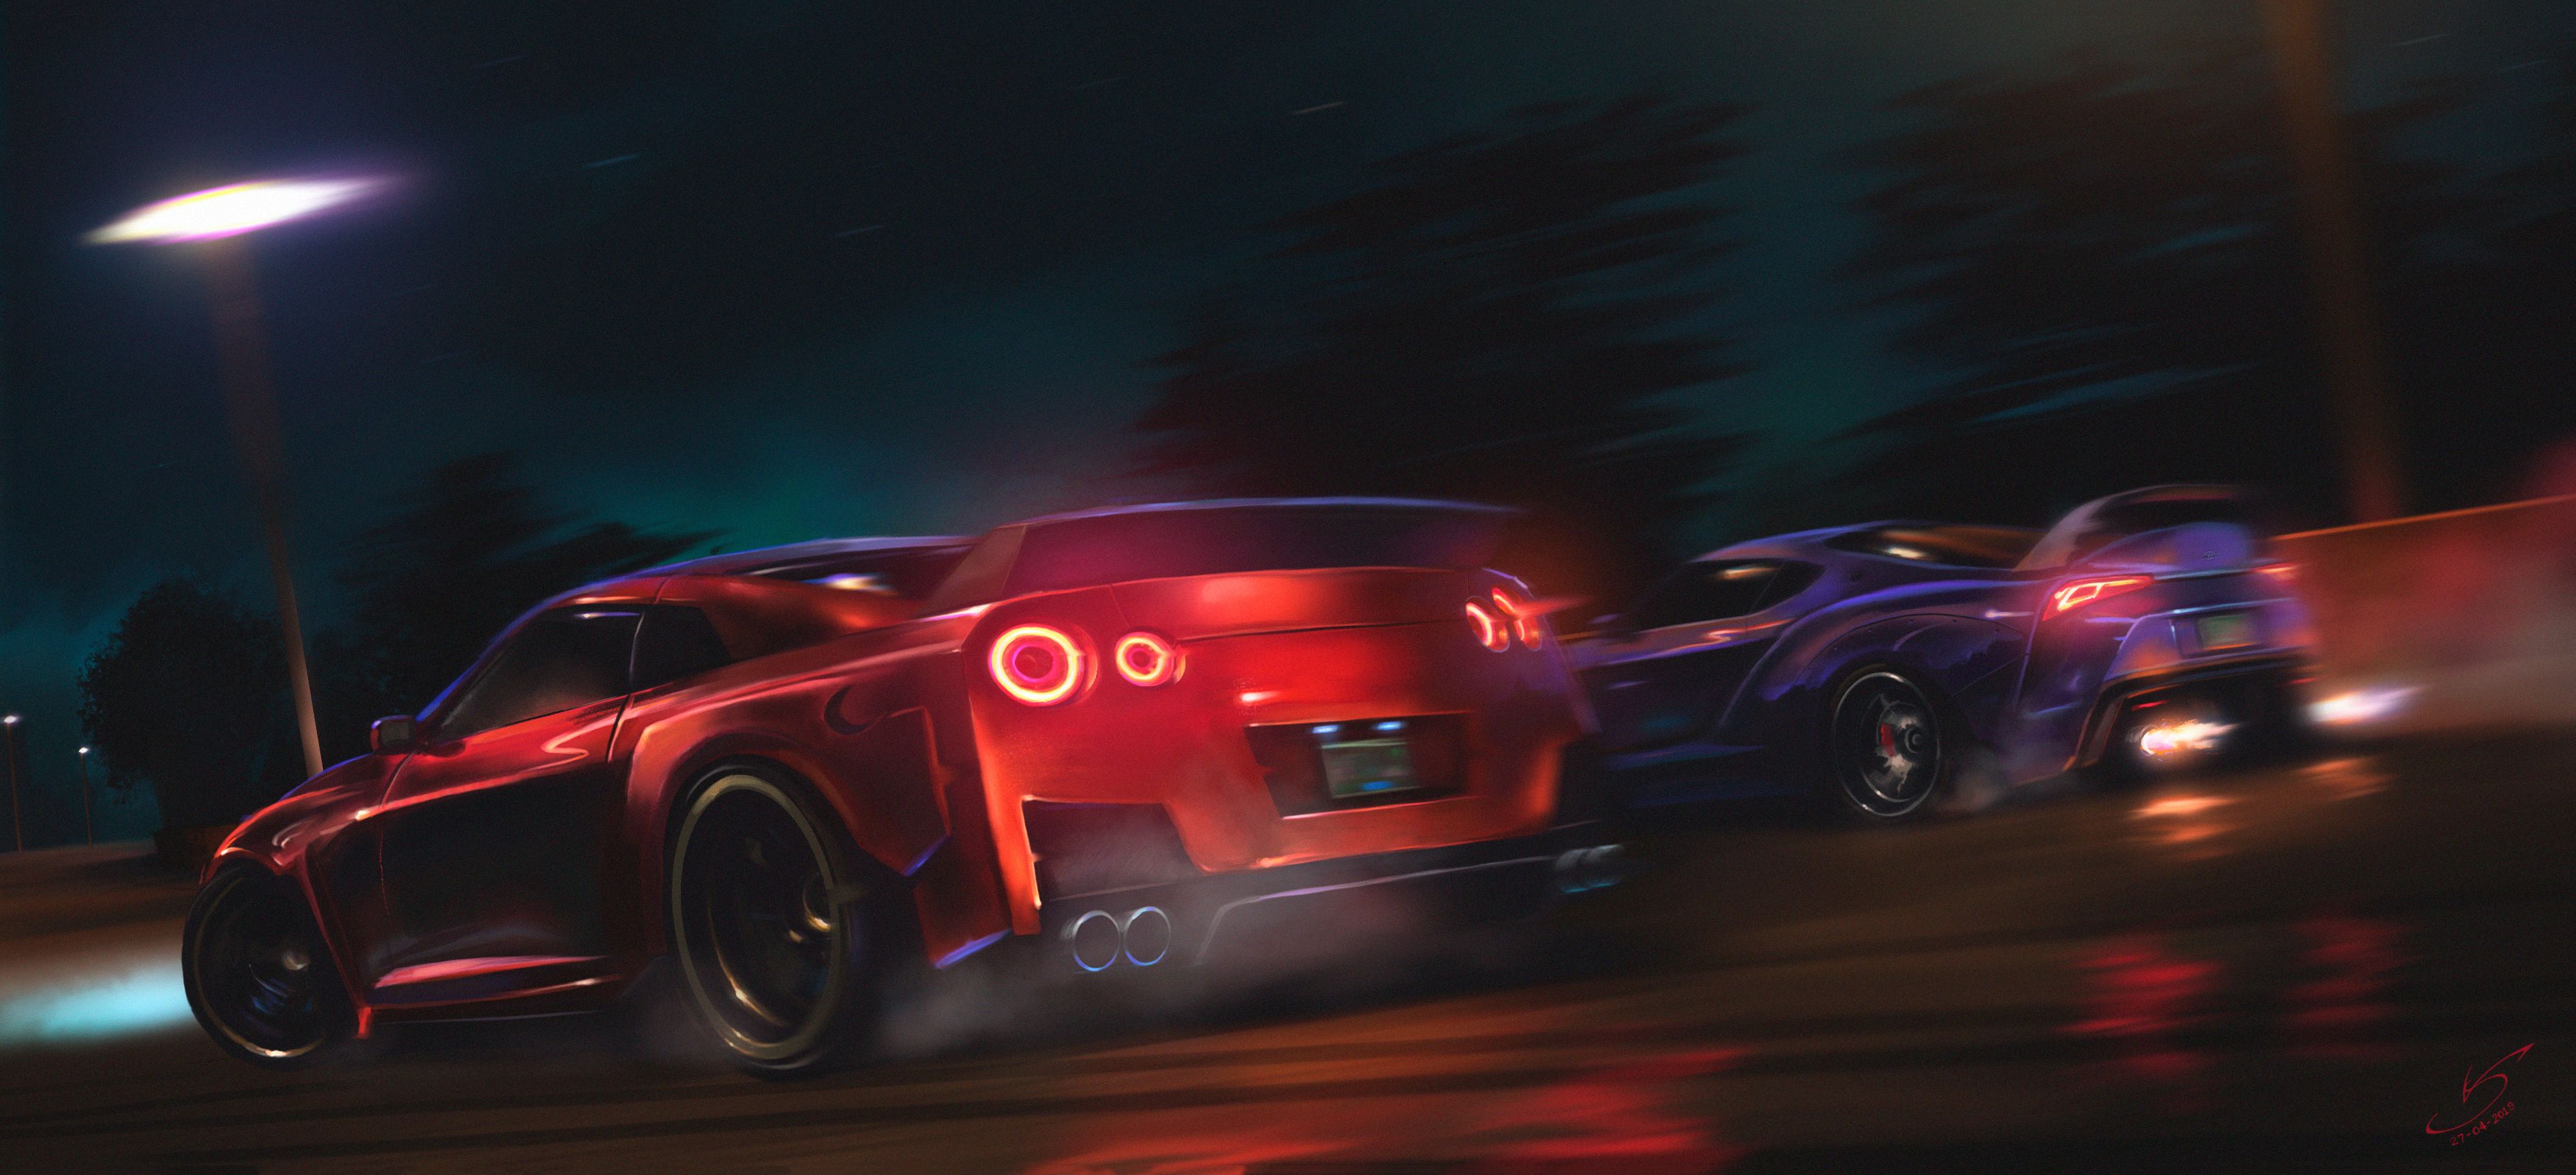 Nissan Gtr Vs Supra 4k, HD Cars, 4k Wallpaper, Image, Background, Photo and Picture